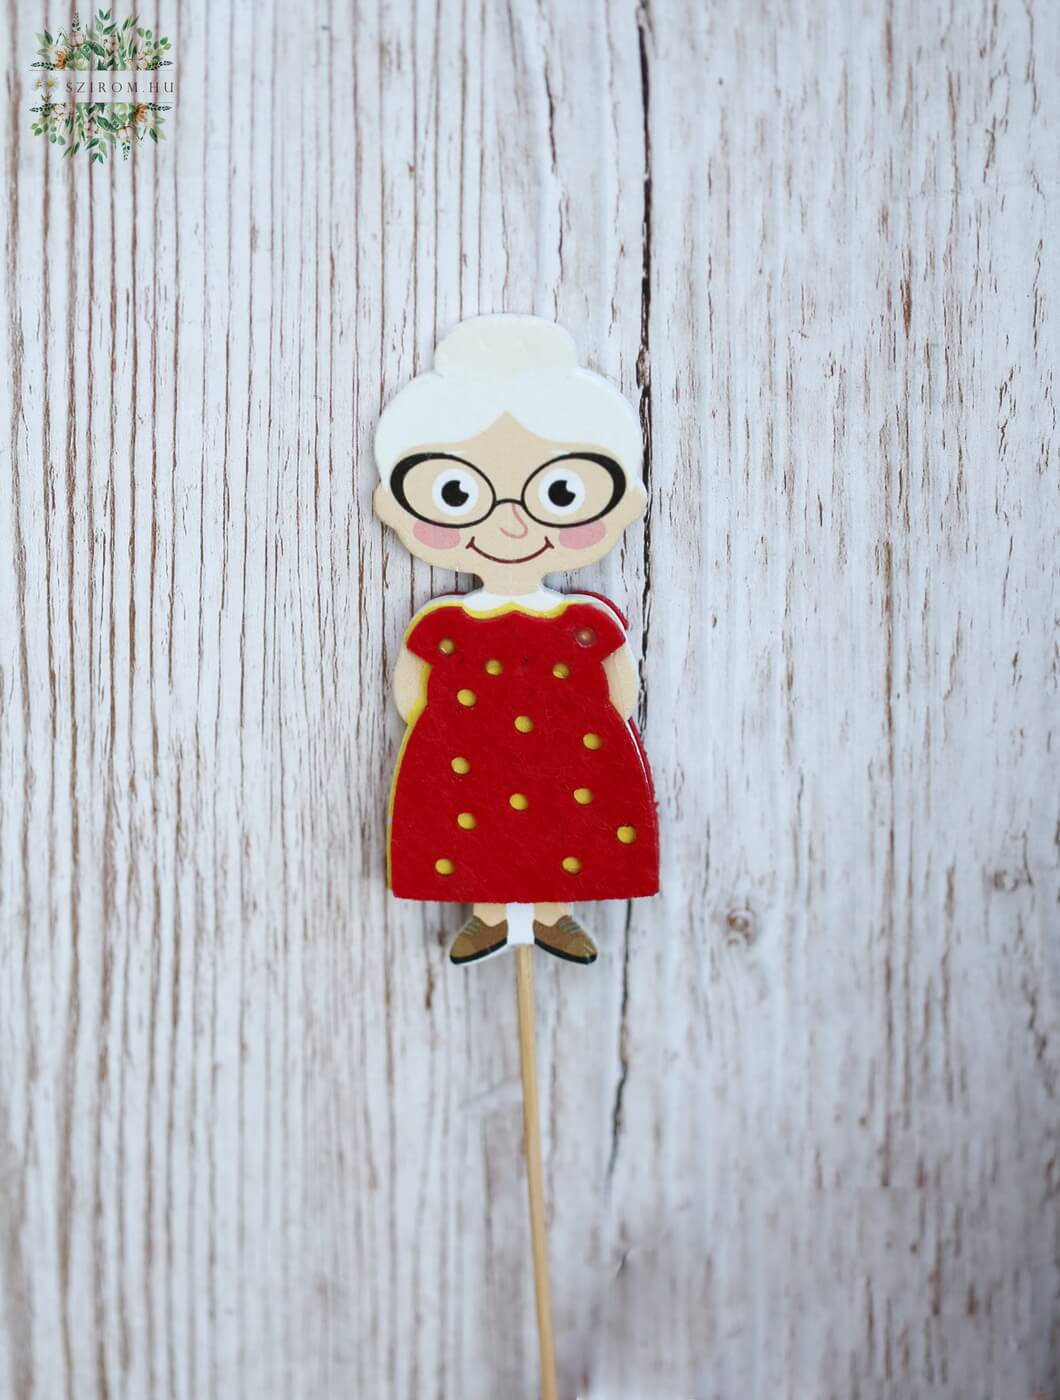 flower delivery Budapest - Granny figure on stick